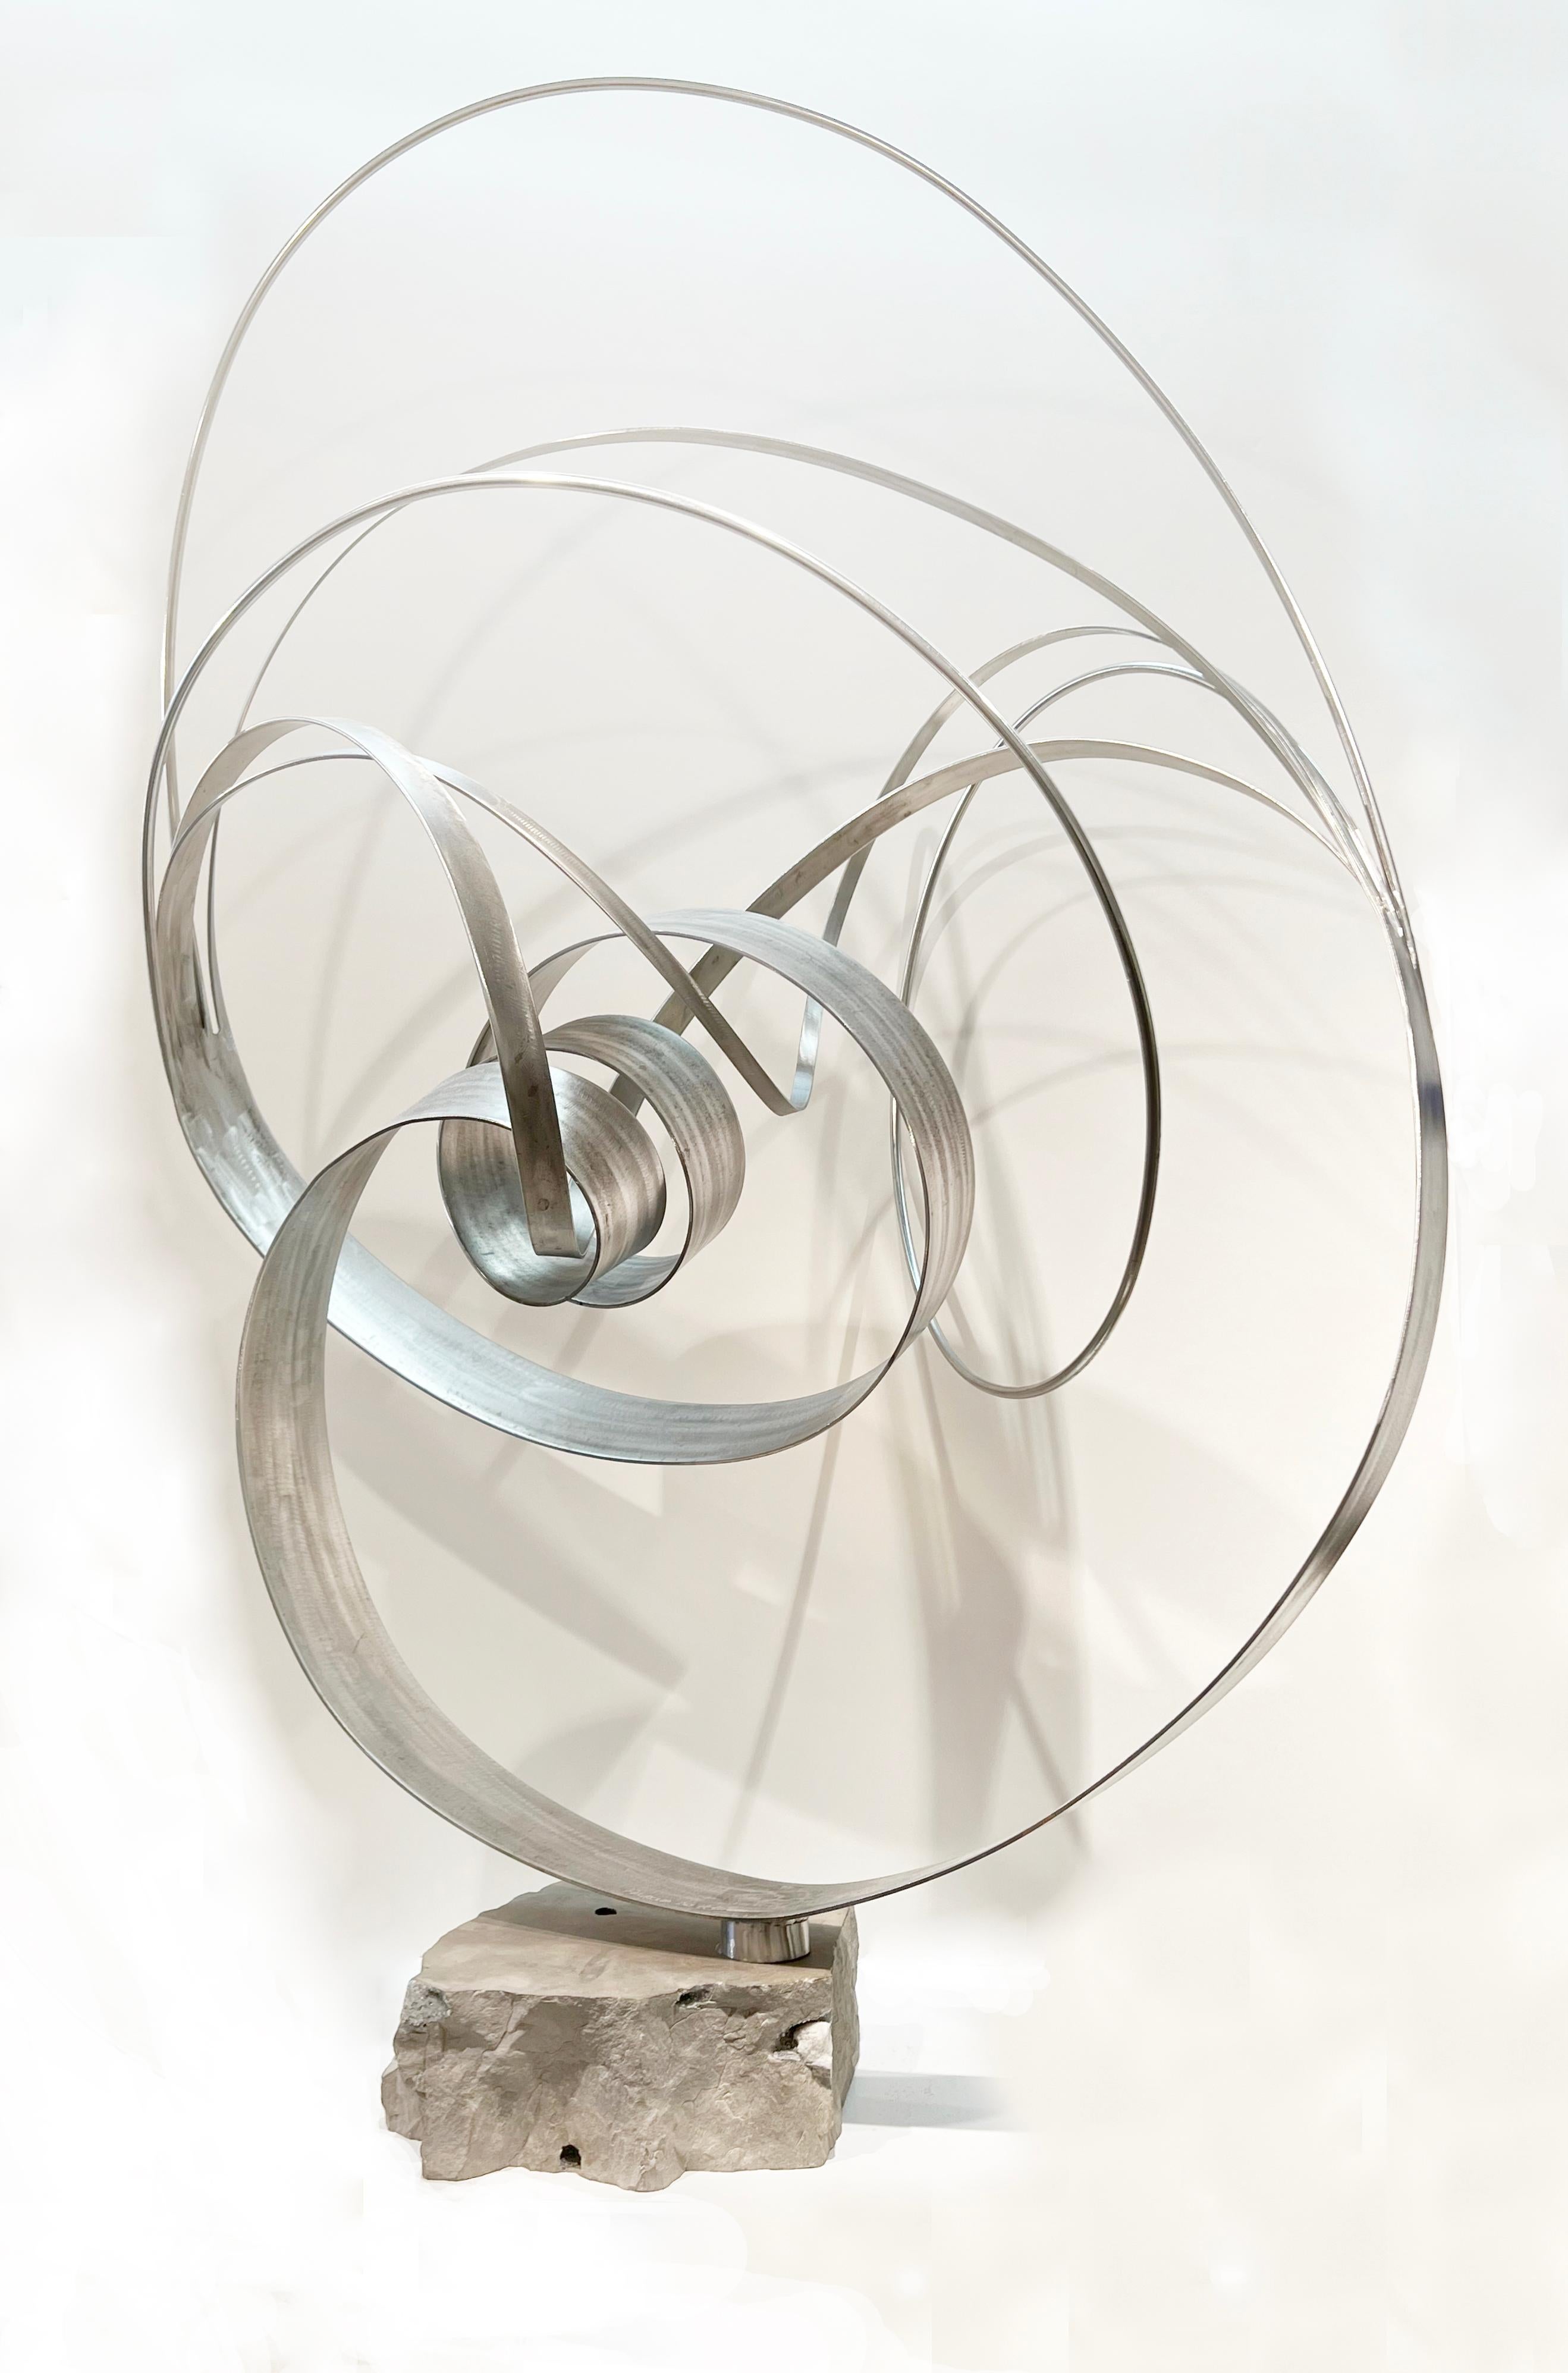 Richard Sturgeon Abstract Sculpture - Regroup, large stainless steel and stone spiral abstract sculpture, 2021